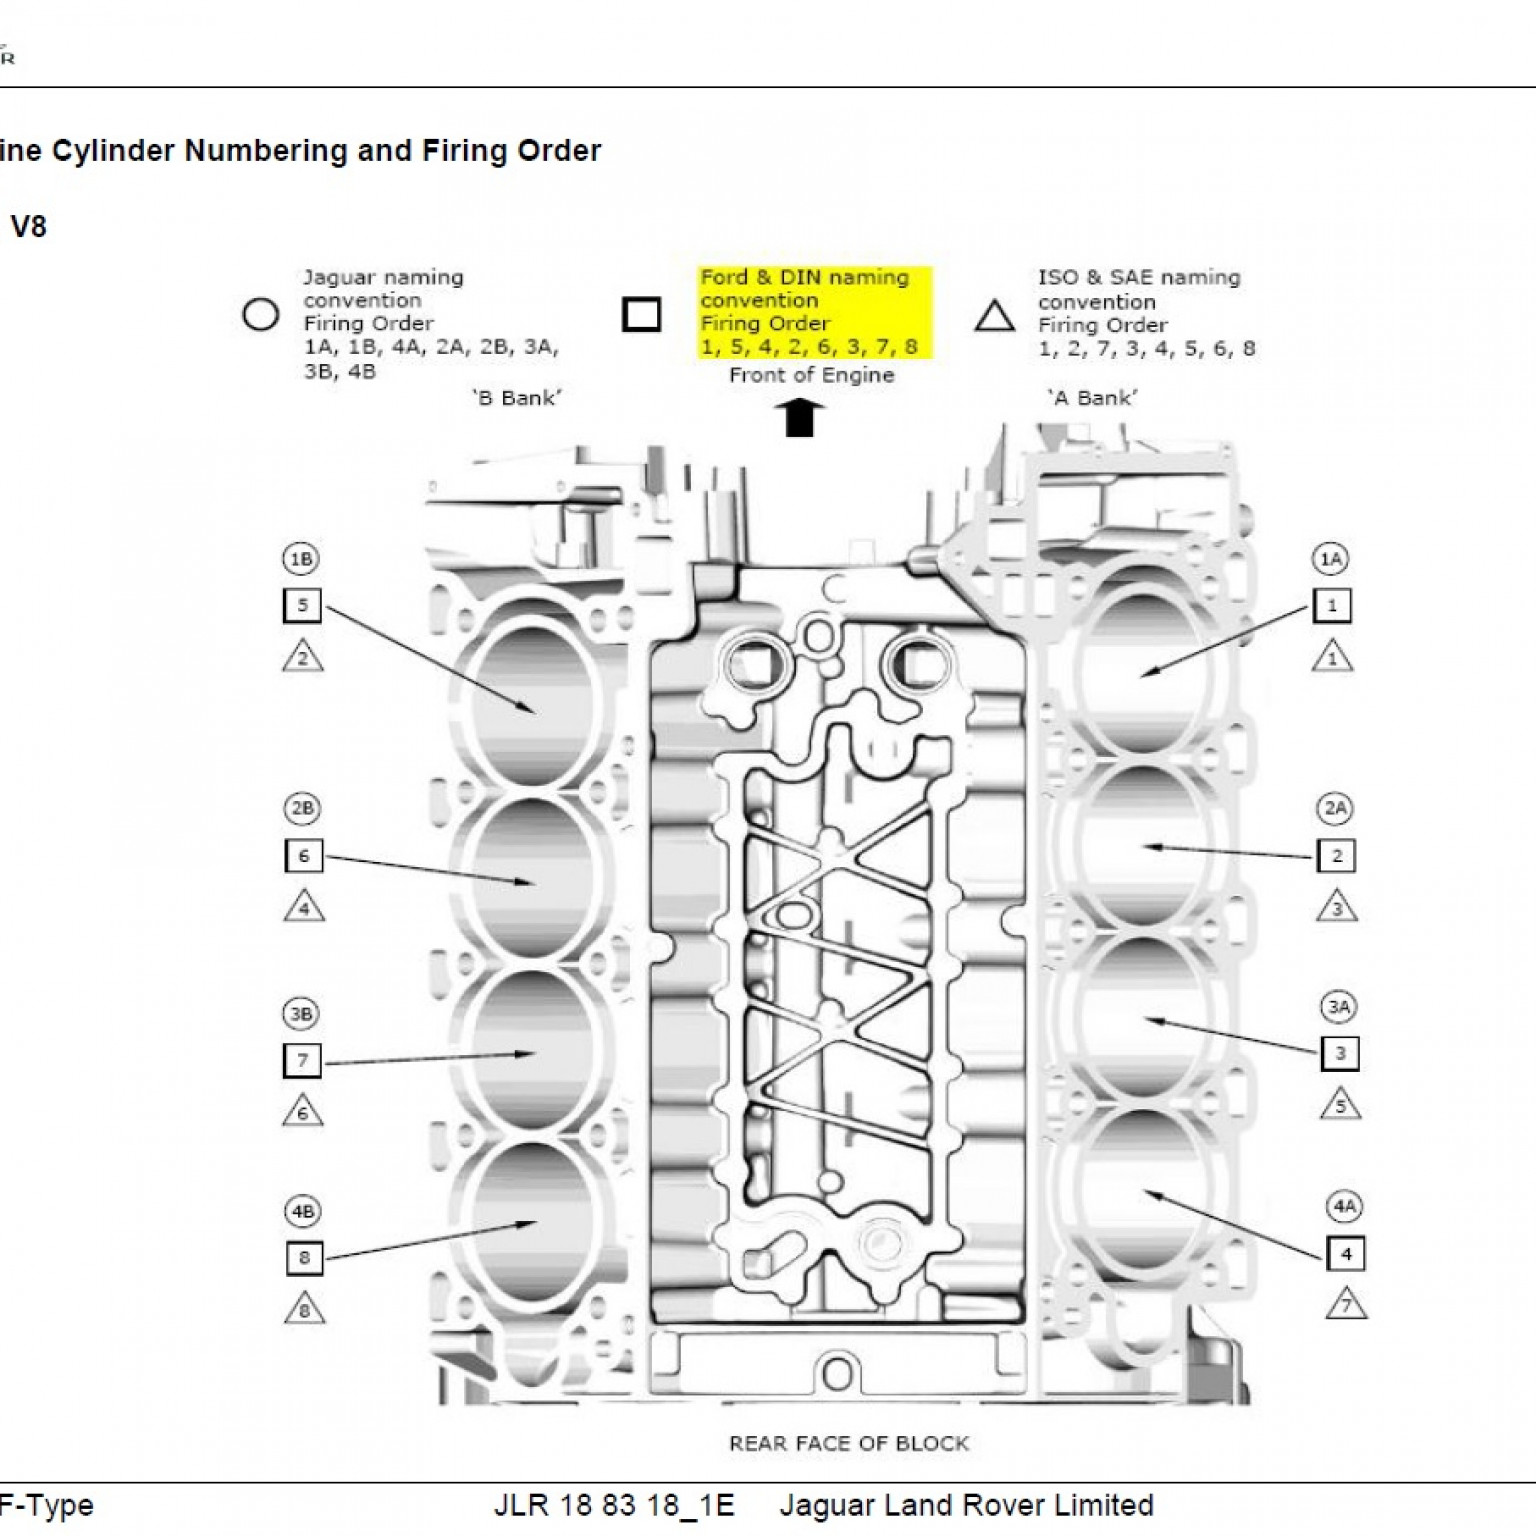 2004 Ford Escape 6 Cylinder Firing Order | Wiring and Printable